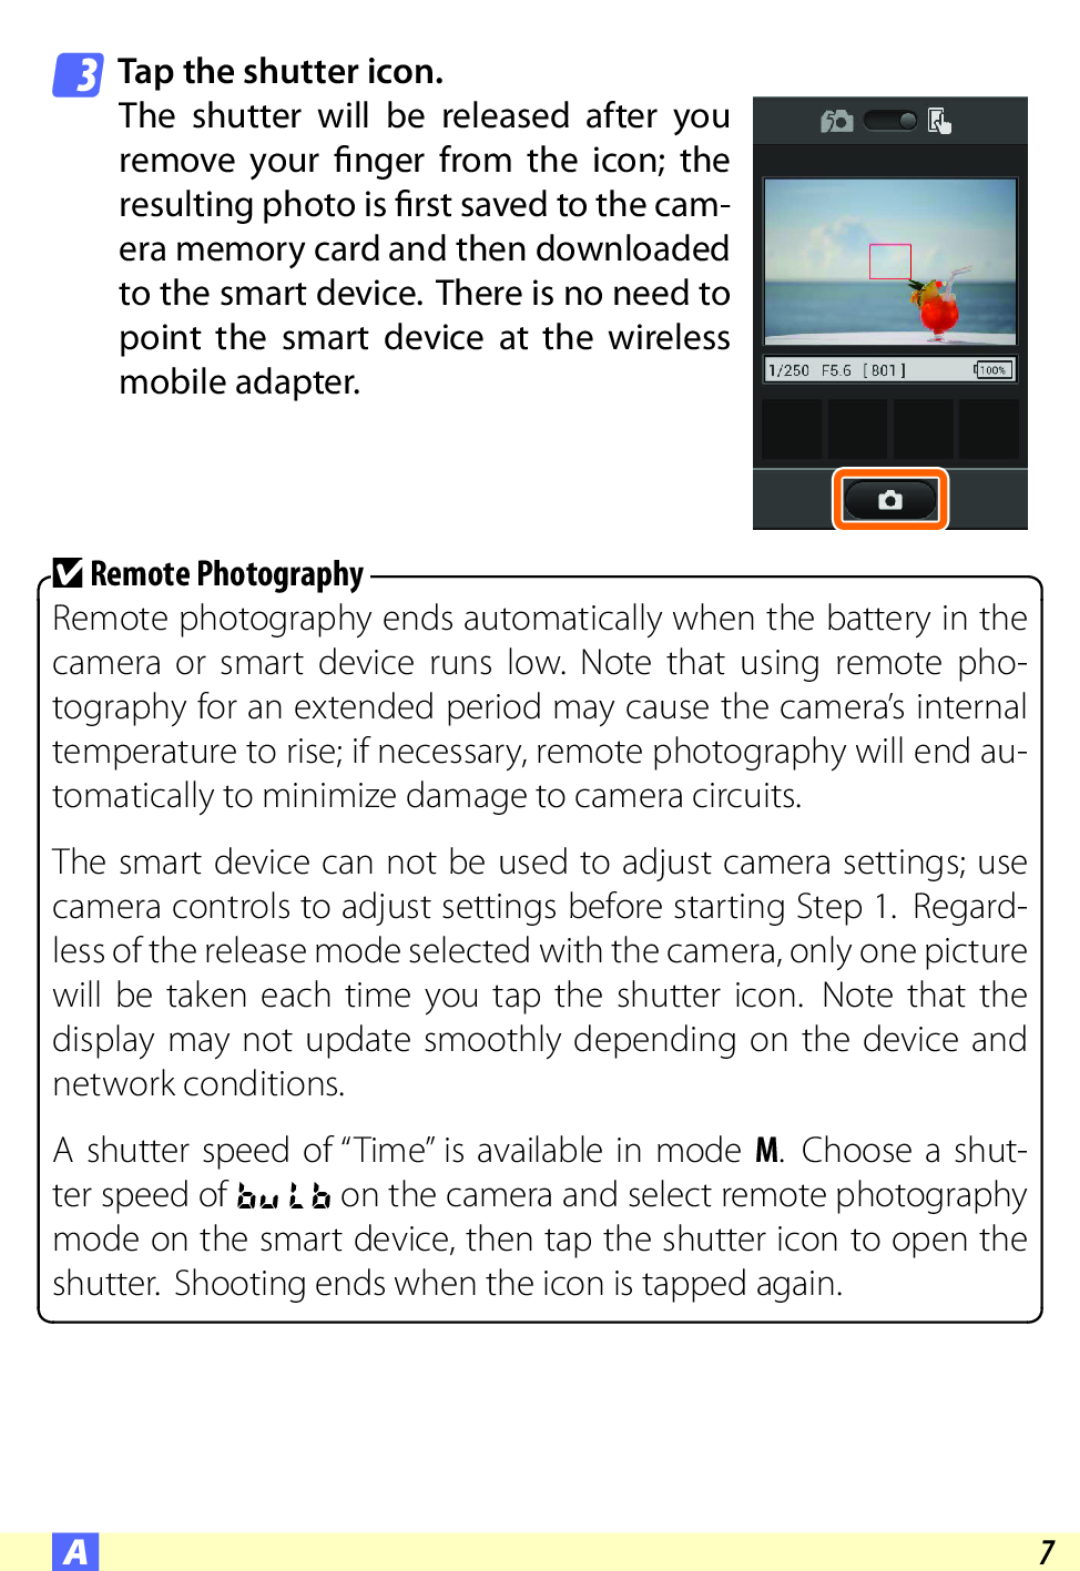 Nikon D600 user manual Tap the shutter icon, D Remote Photography 